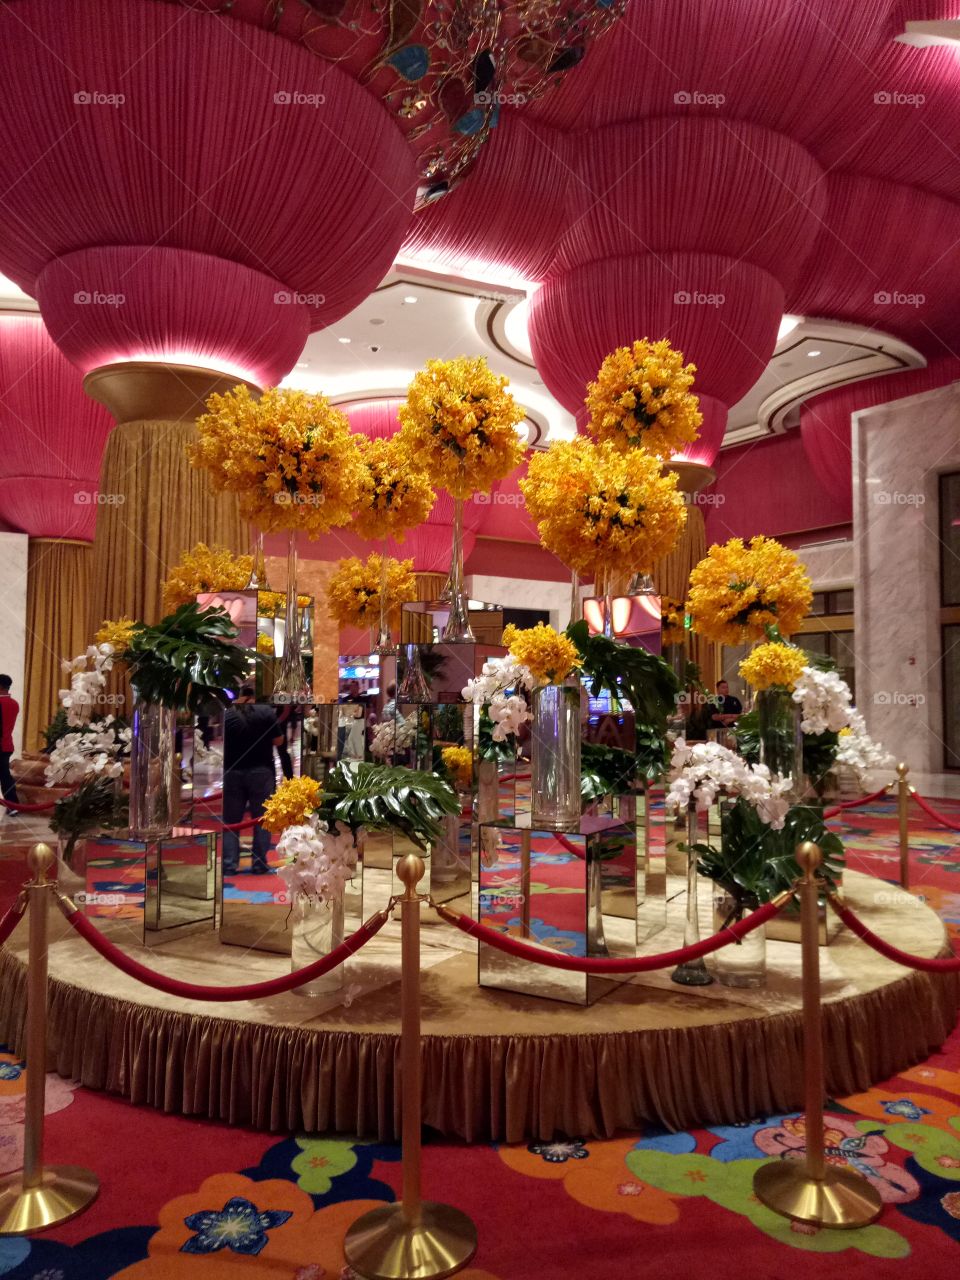 Colorful display at a hotel lobby.